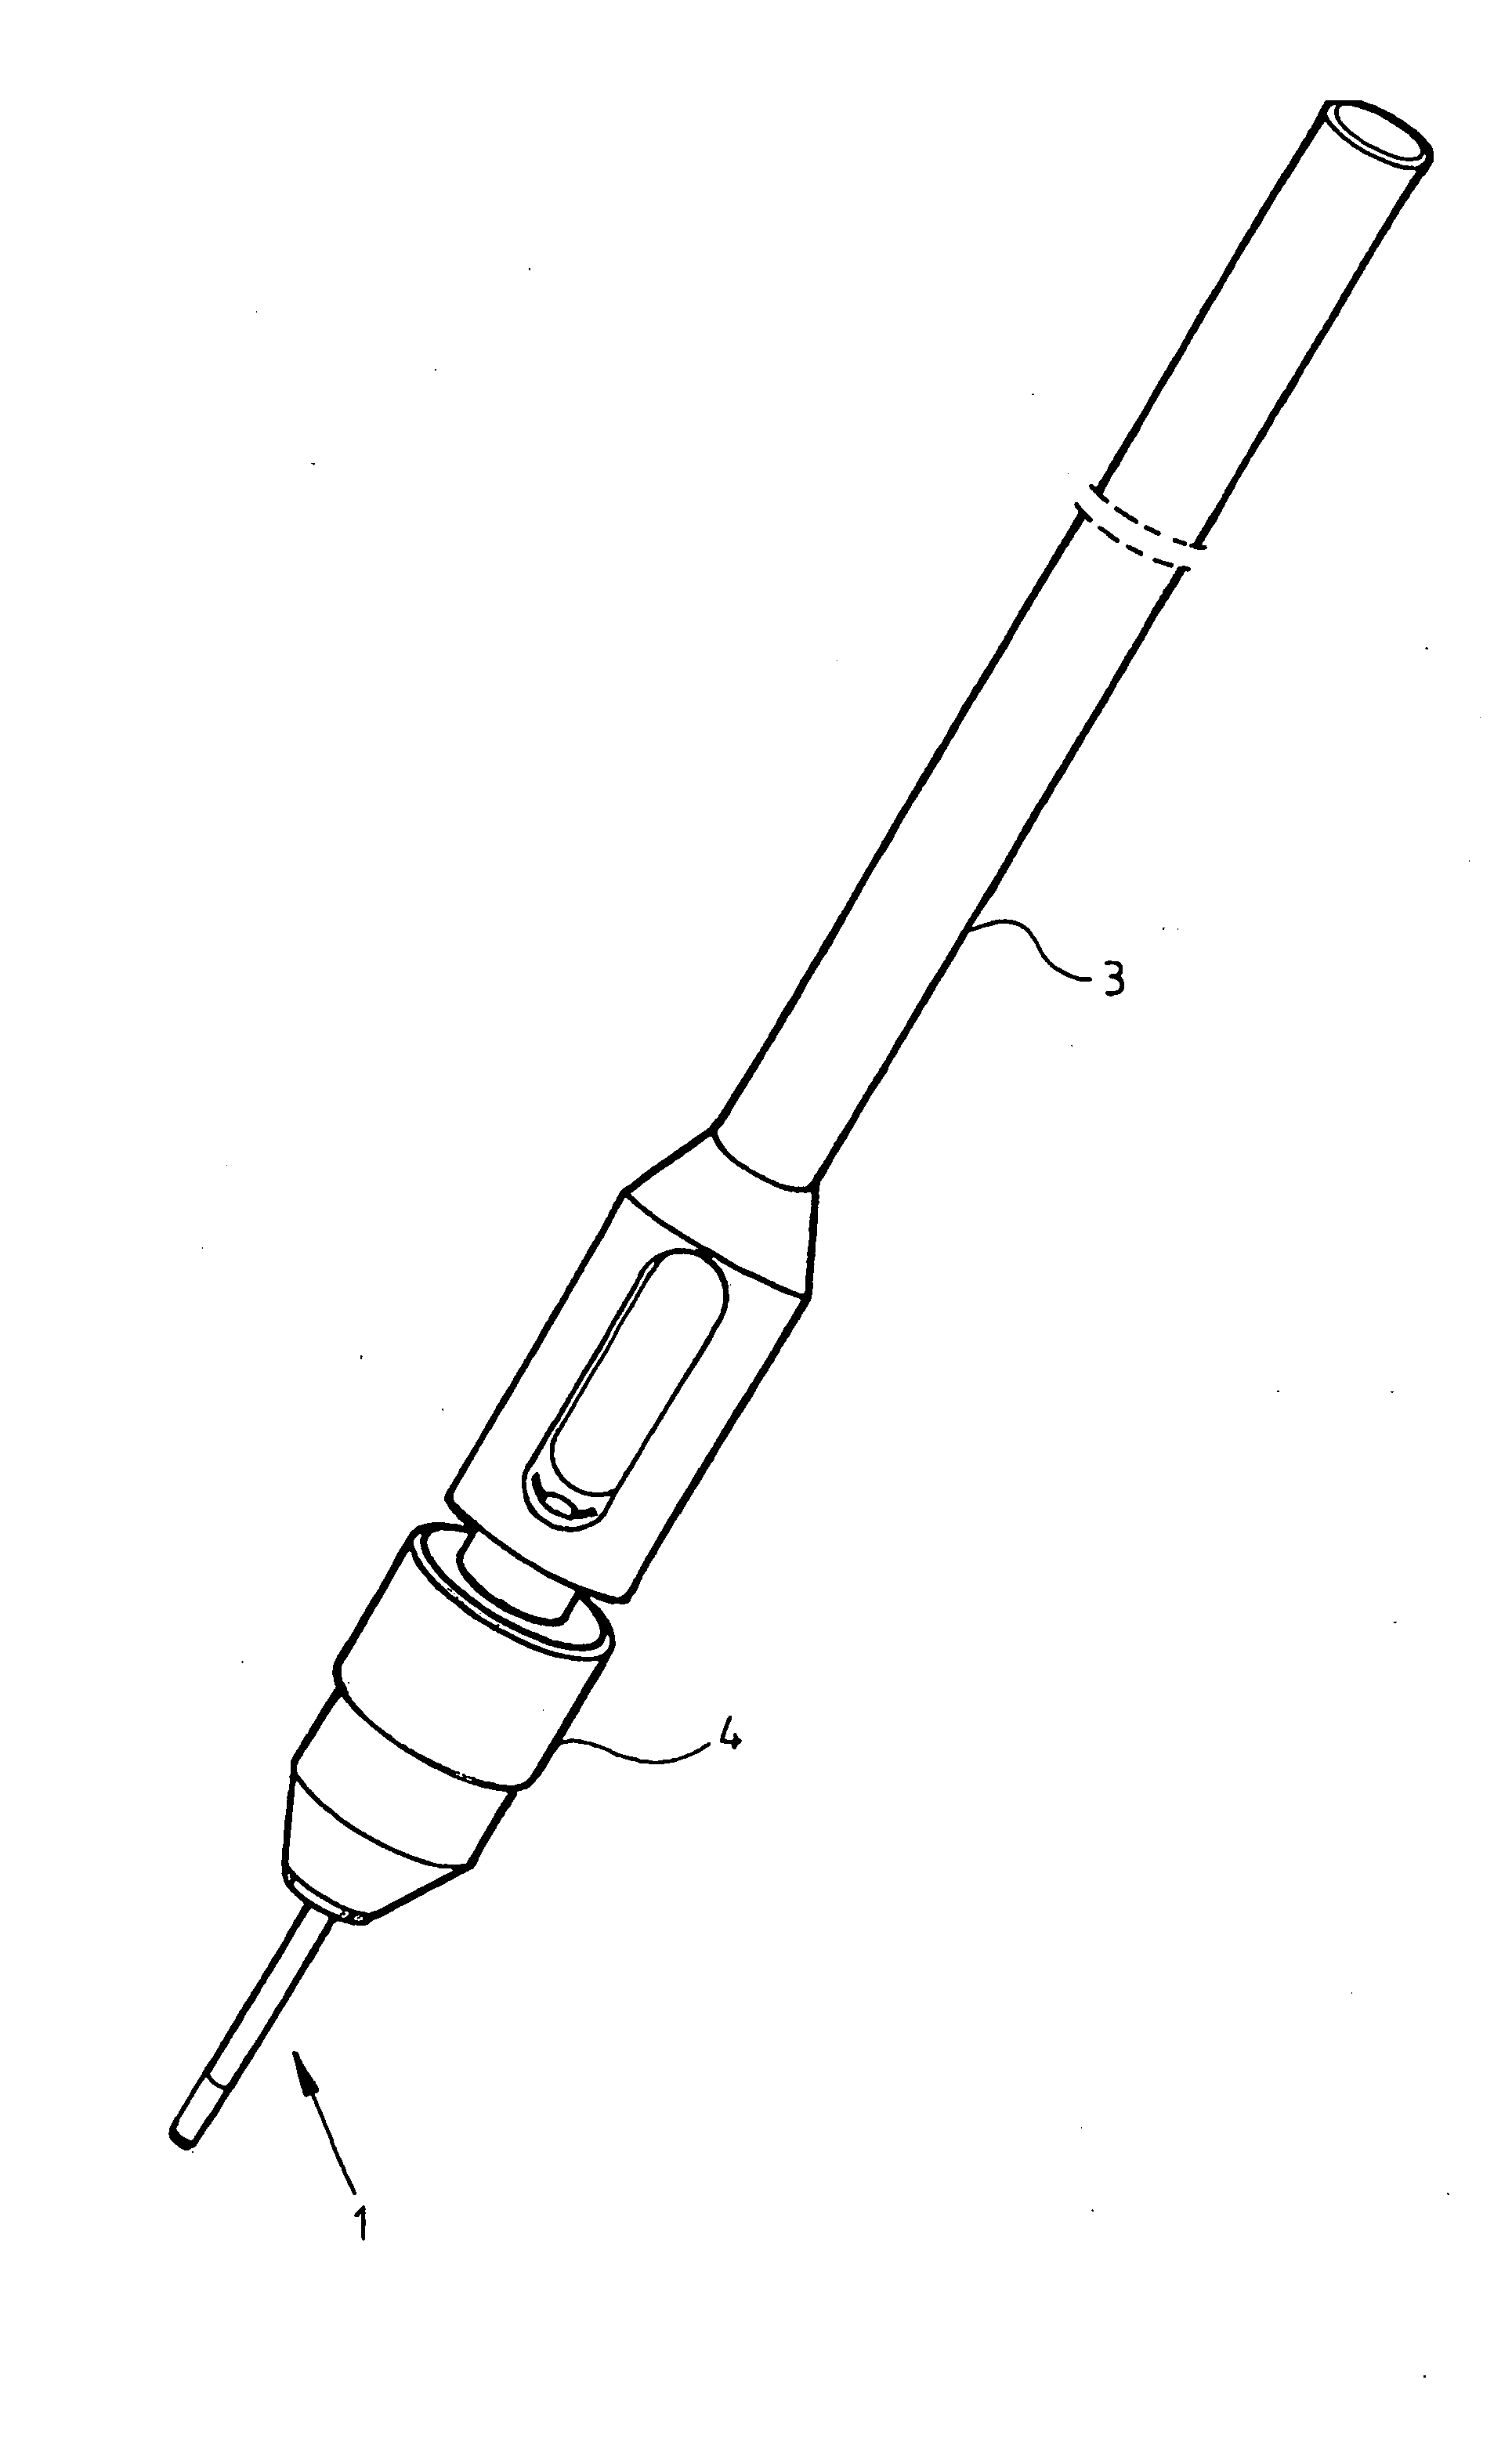 Hair transplanting device and method for the use thereof